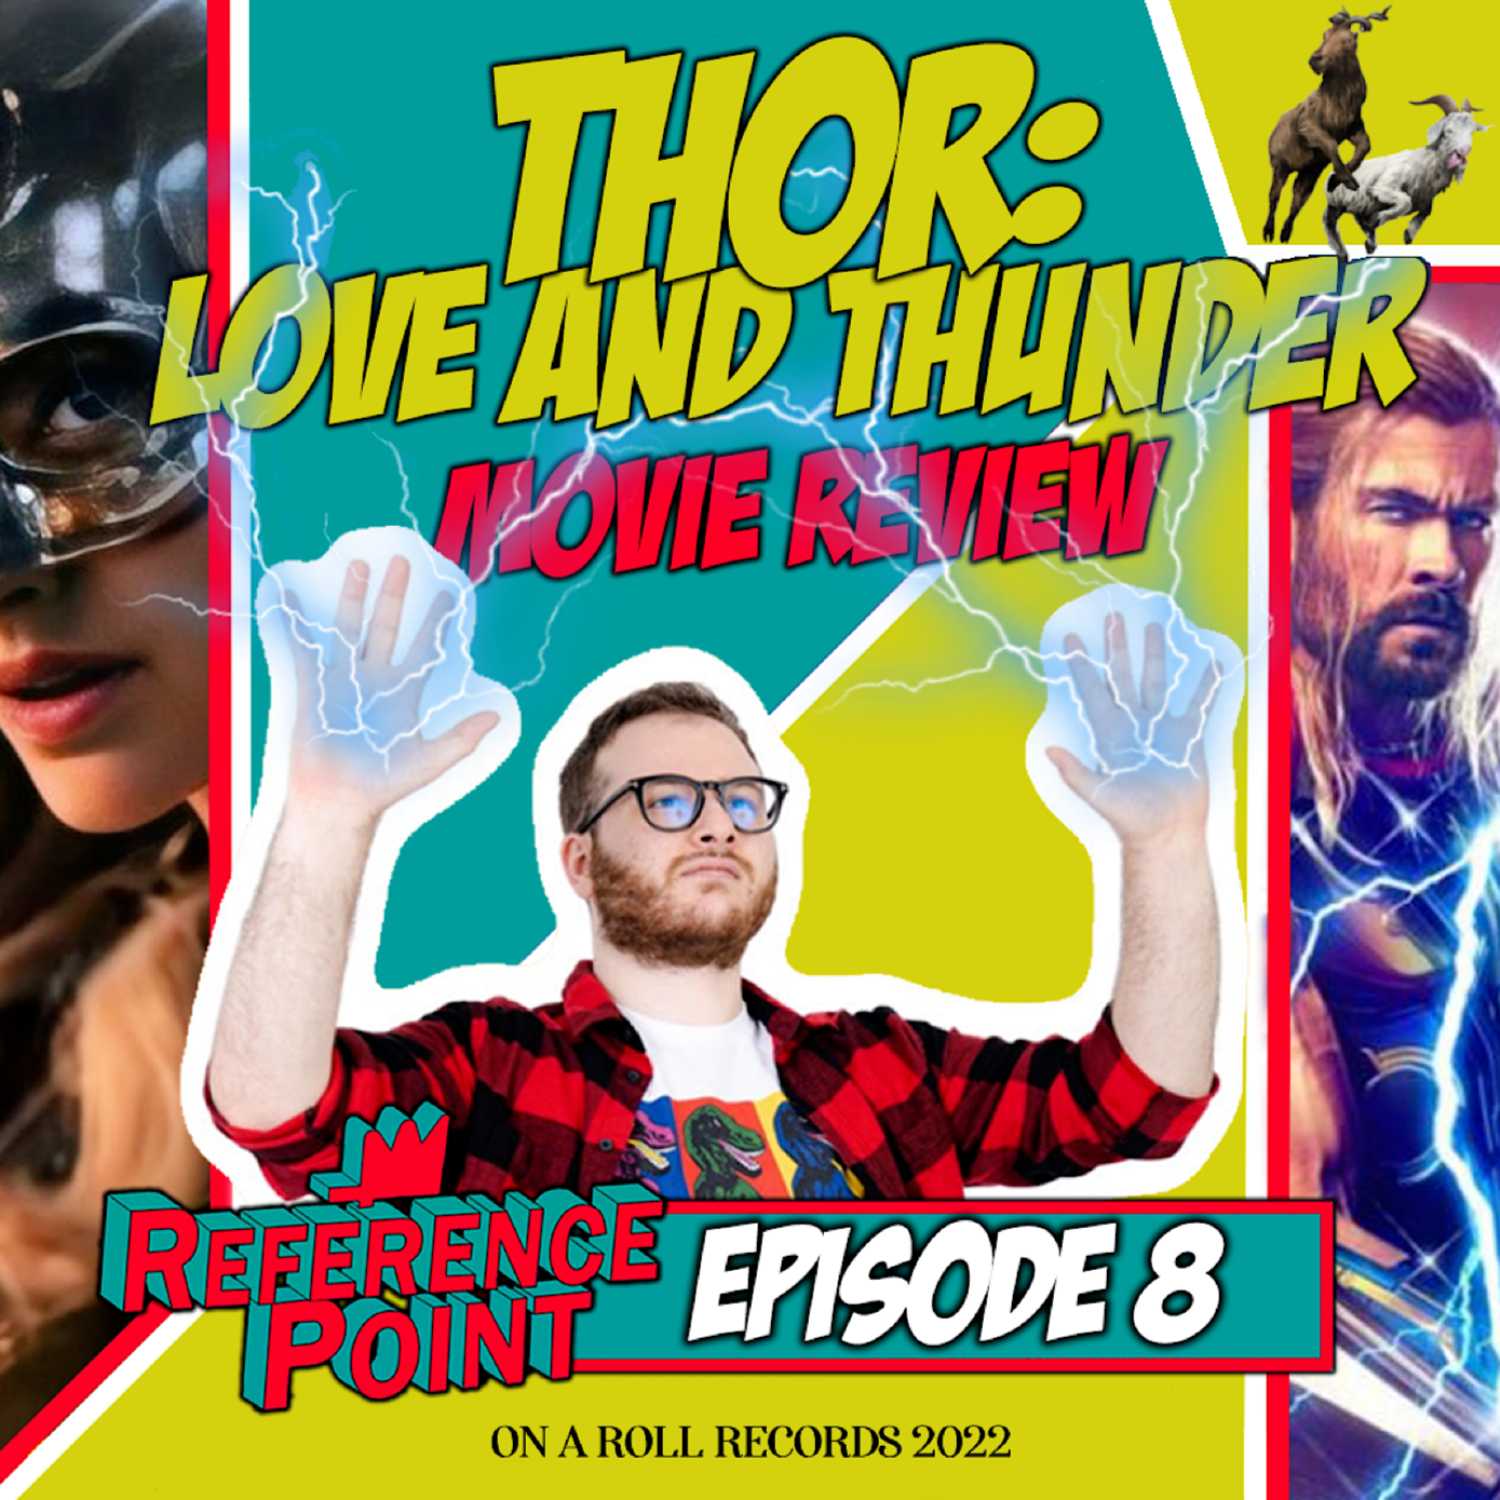 REFERENCE POINT - Episode 8 - THOR: LOVE AND THUNDER (Movie Review)